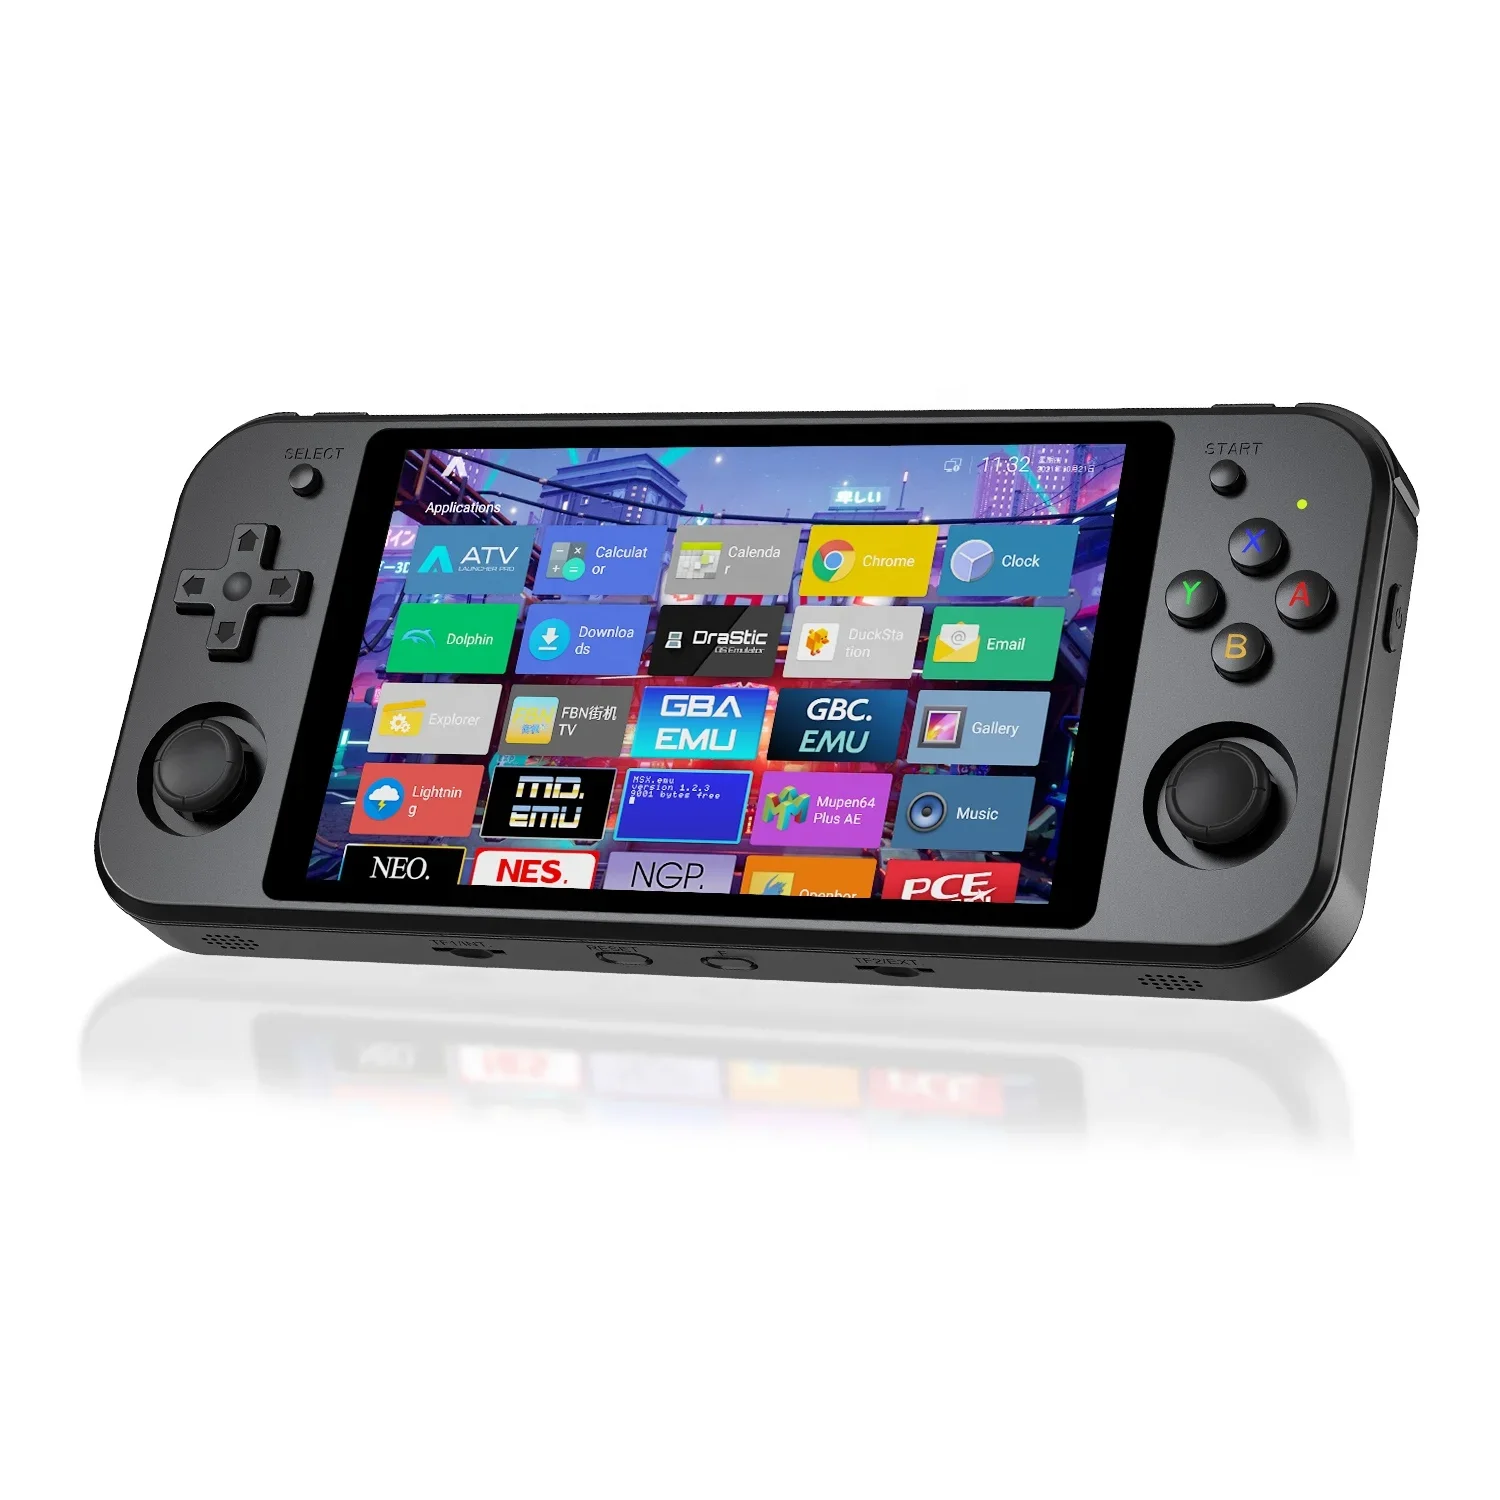 Retro Handheld Game Player RK3399 Linux Android Dual-Boot HD Touch Screen Portable Gaming Console